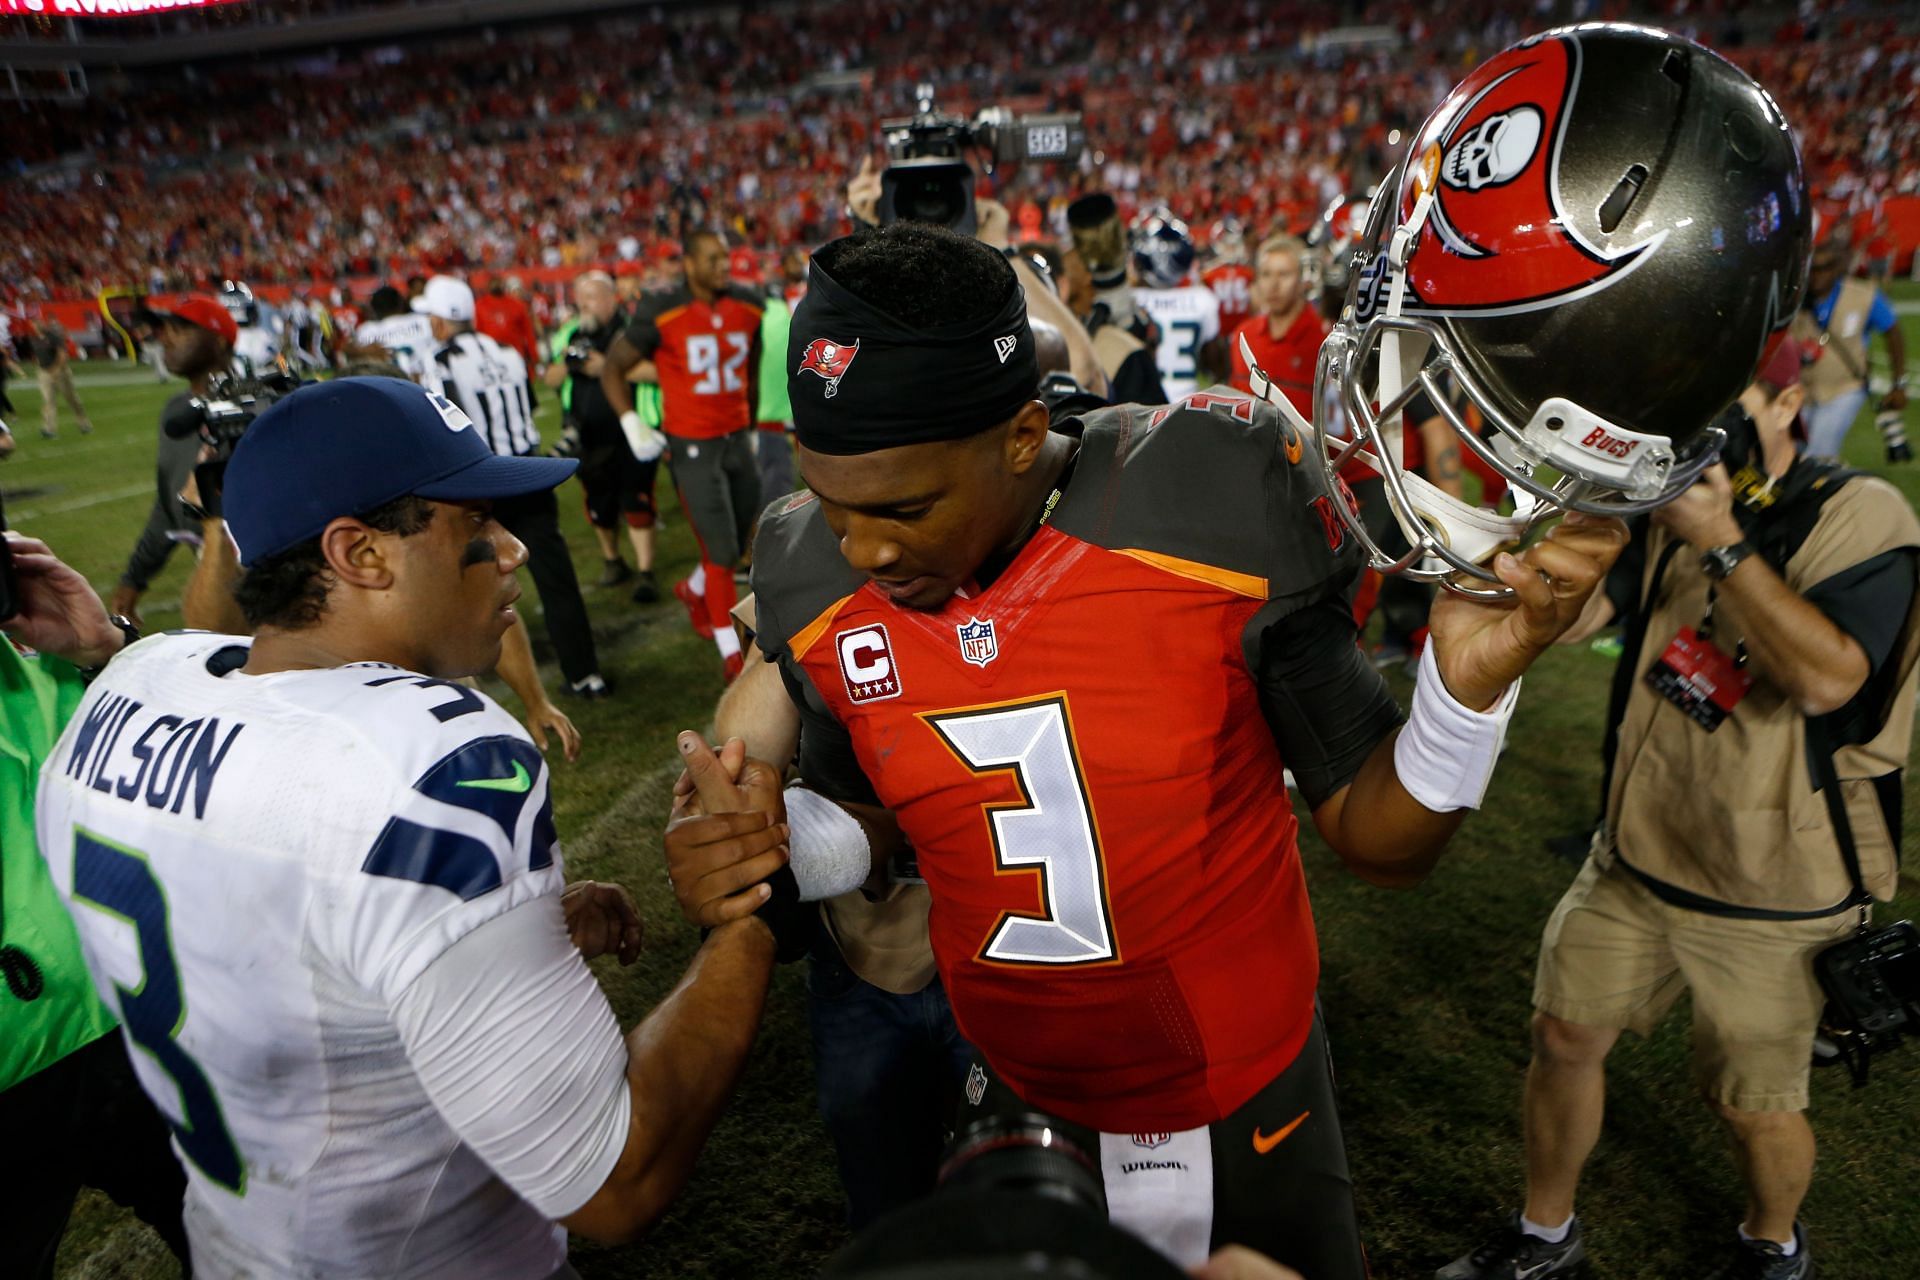 Jameis Winston (in red) could be one of the potential solutions at quarterback if Russell Wilson (in white) leaves the Seahawks (Photo: Getty)